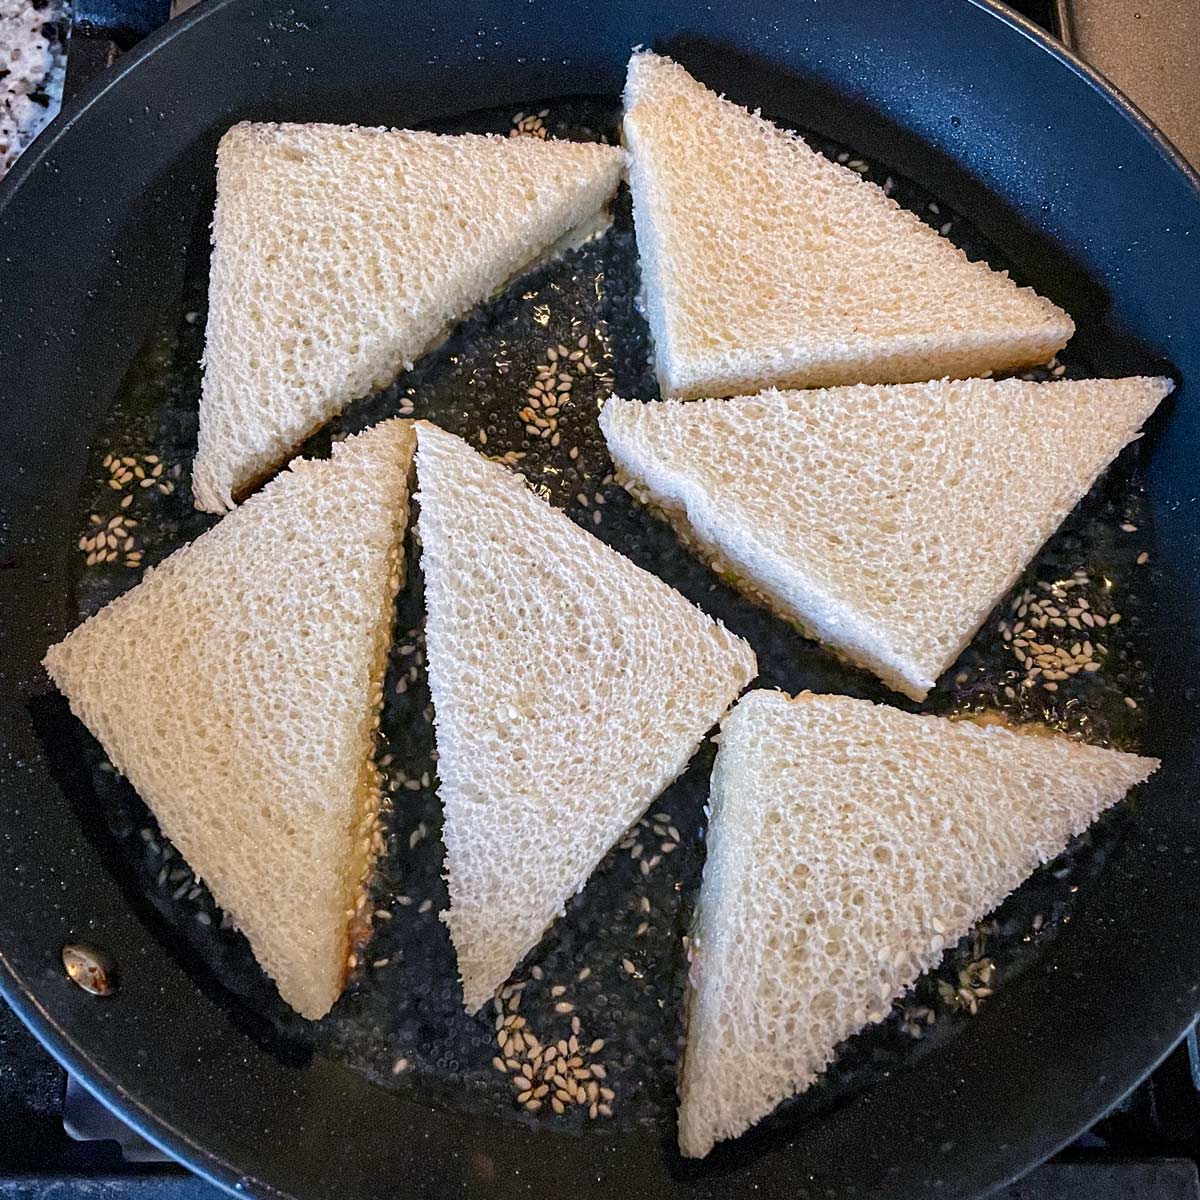 Six triangular pieces of bread shallow frying in a nonstick skillet.